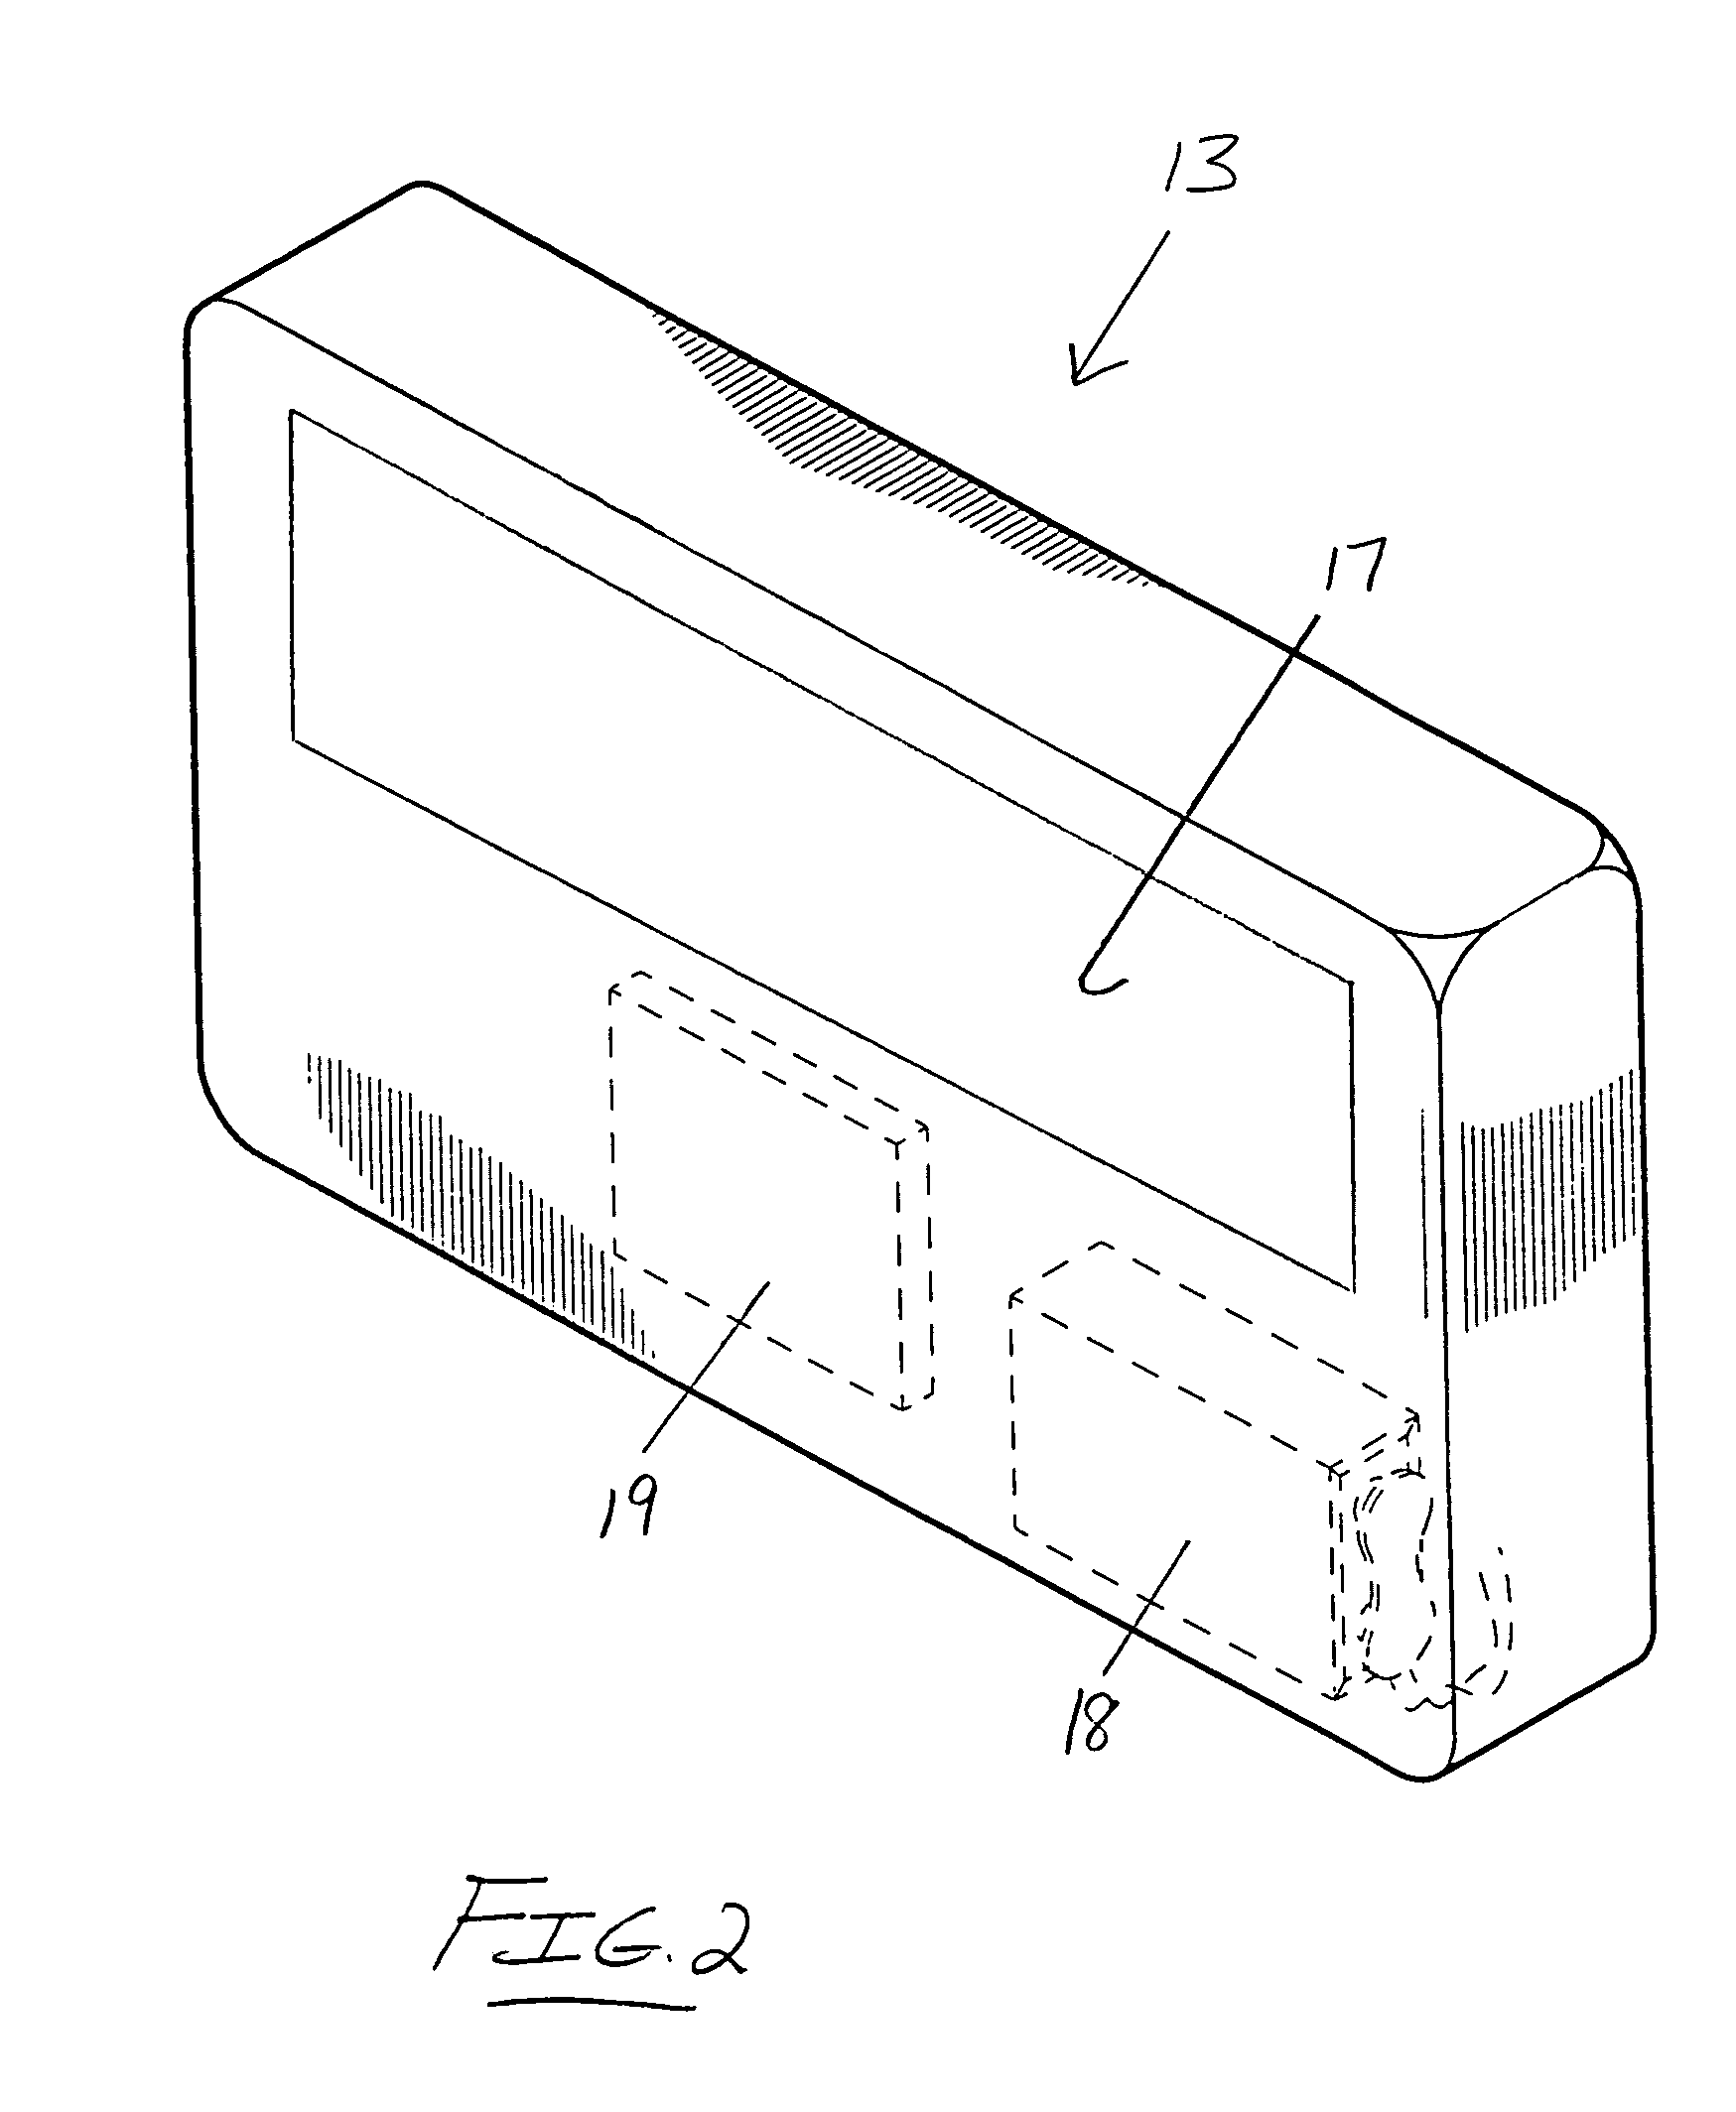 System and method for notifying a package recipient of package arrival